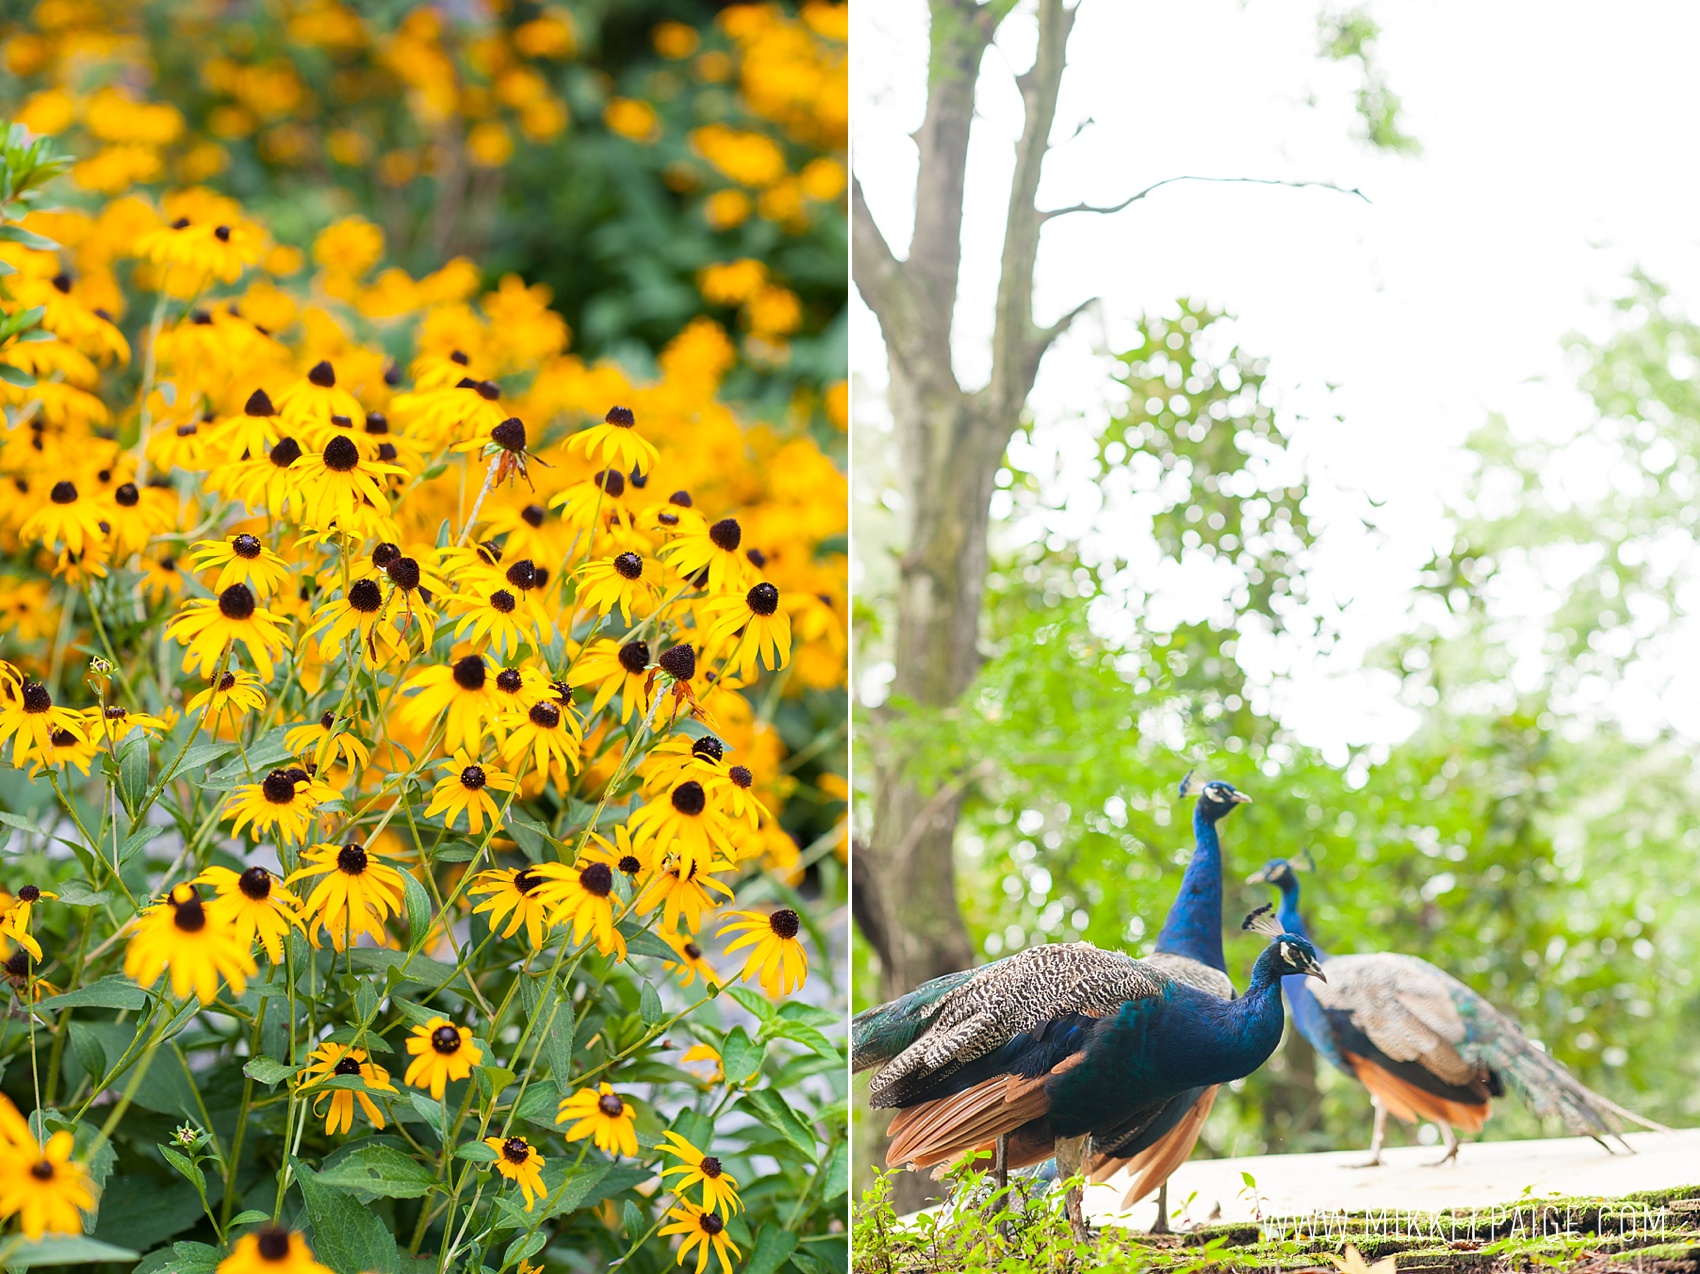 Peacocks and Black-Eyed Susan yellow flowers at Magnolia Plantation in Charleston, South Carolina. Images by Mikkel Paige Photography.